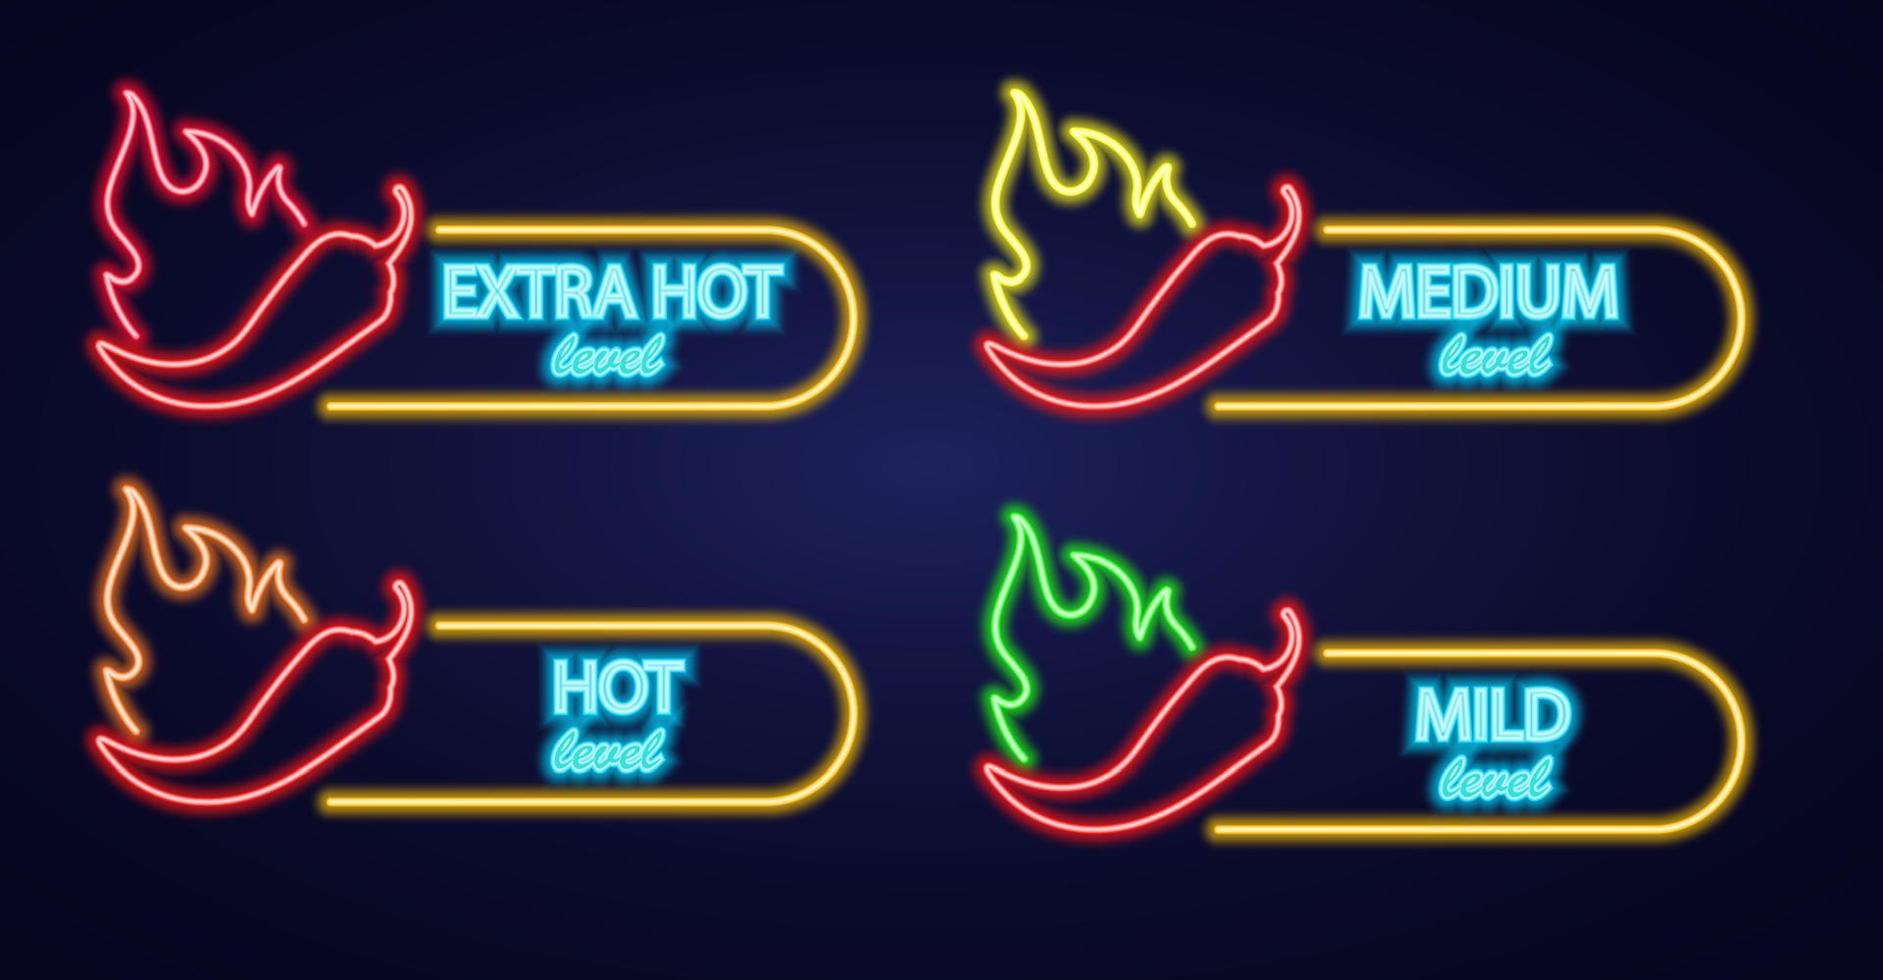 Neon icon set chilli with fire. Signboard with hot burning pepper. Spice Levels vector illustration. Night bright signs.